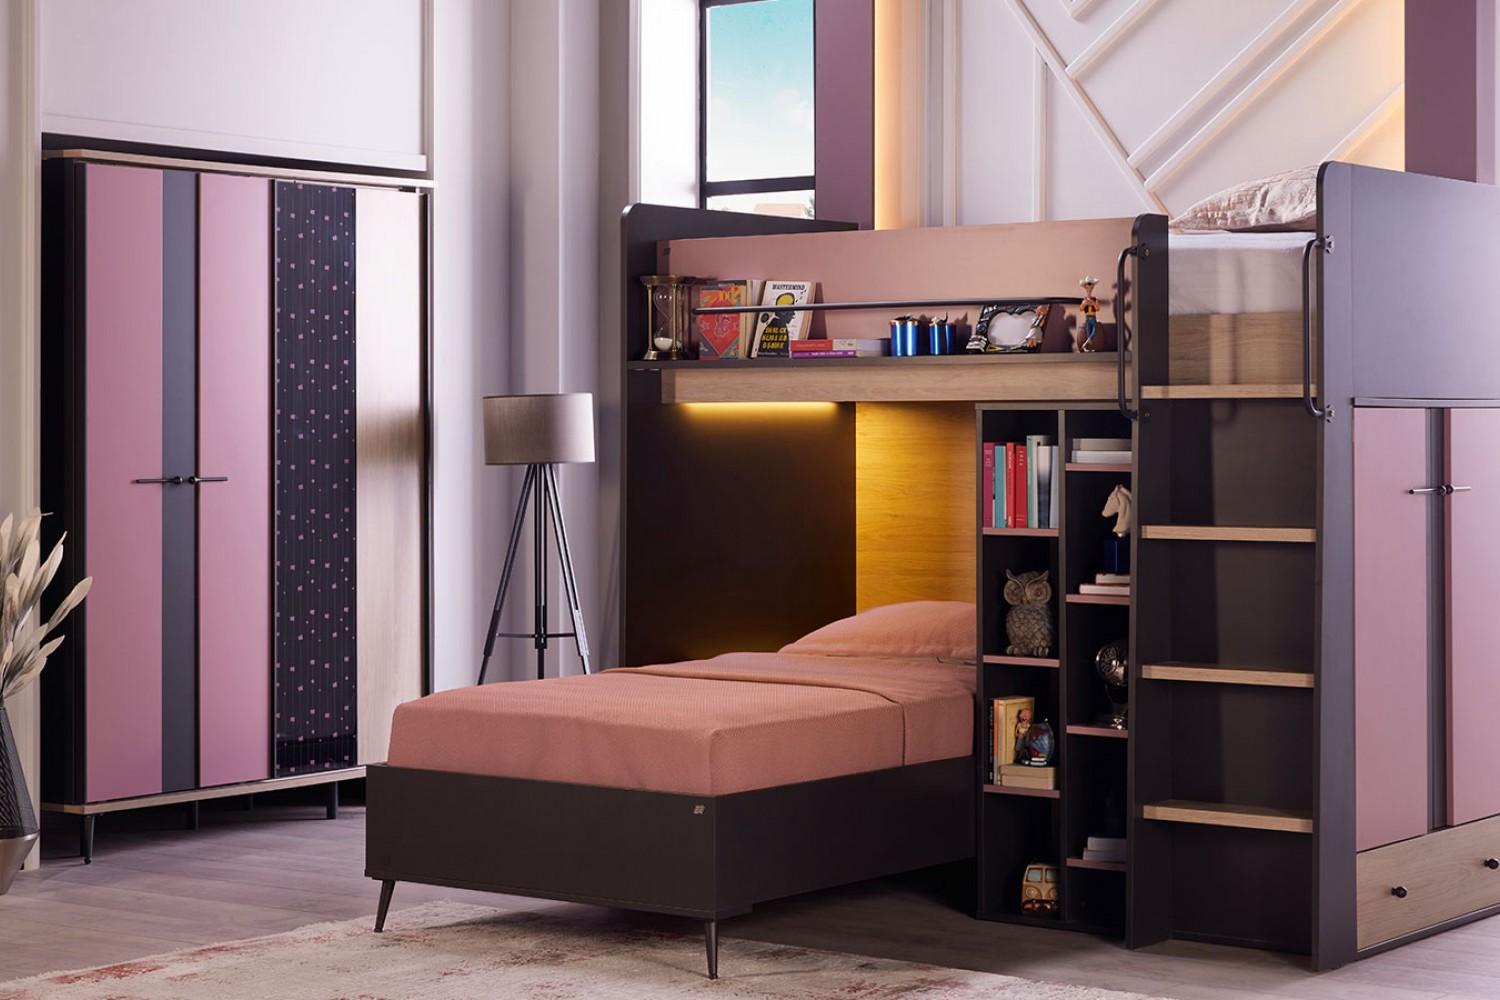 Alice Bunkbed Pink